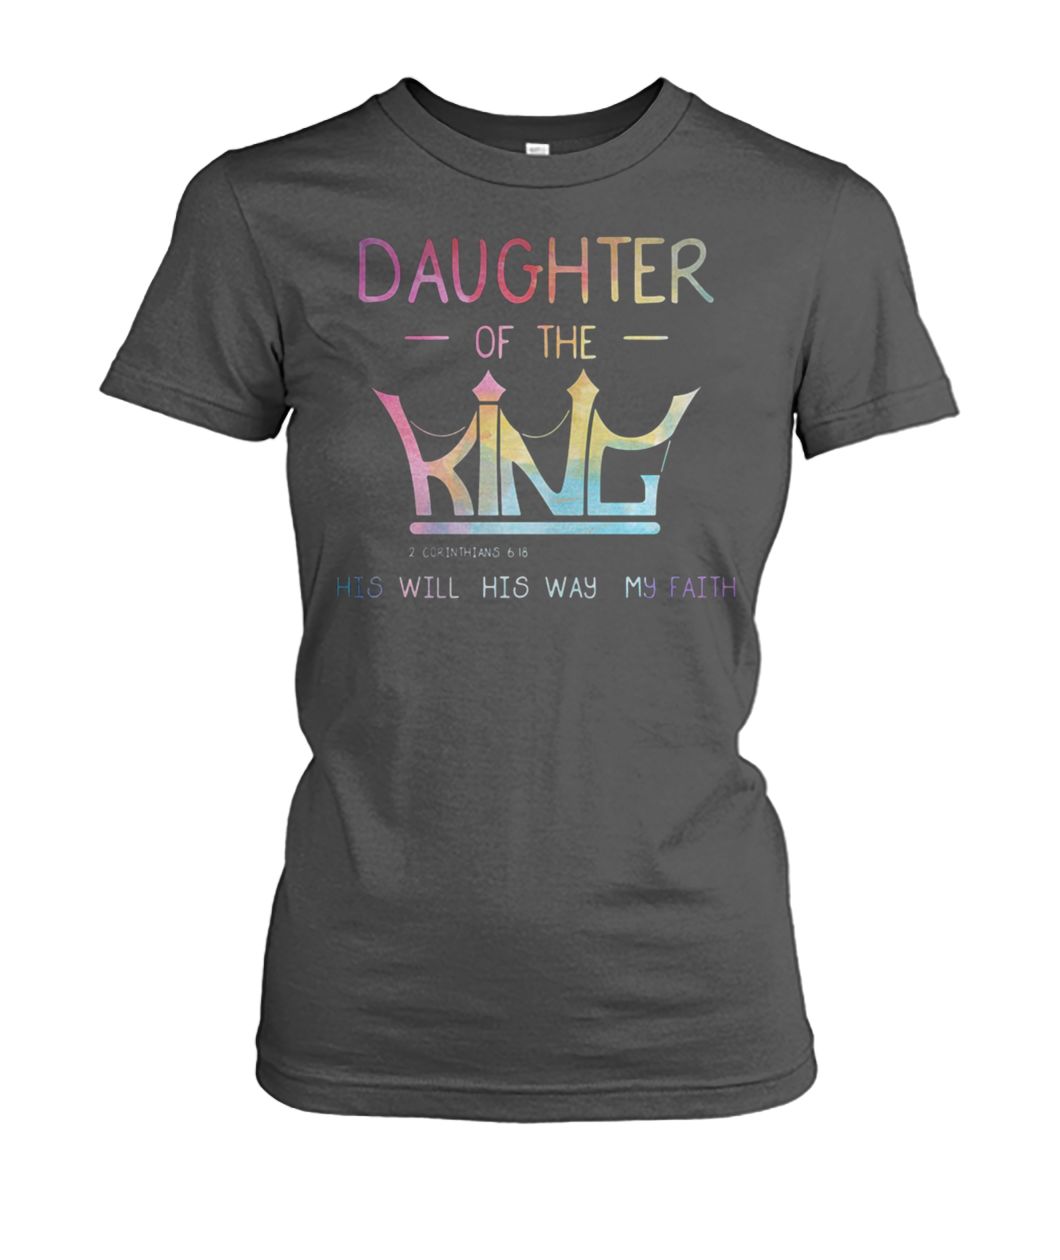 Daughter of the king 2 corinthians 6 18 his will his way my faith women's crew tee